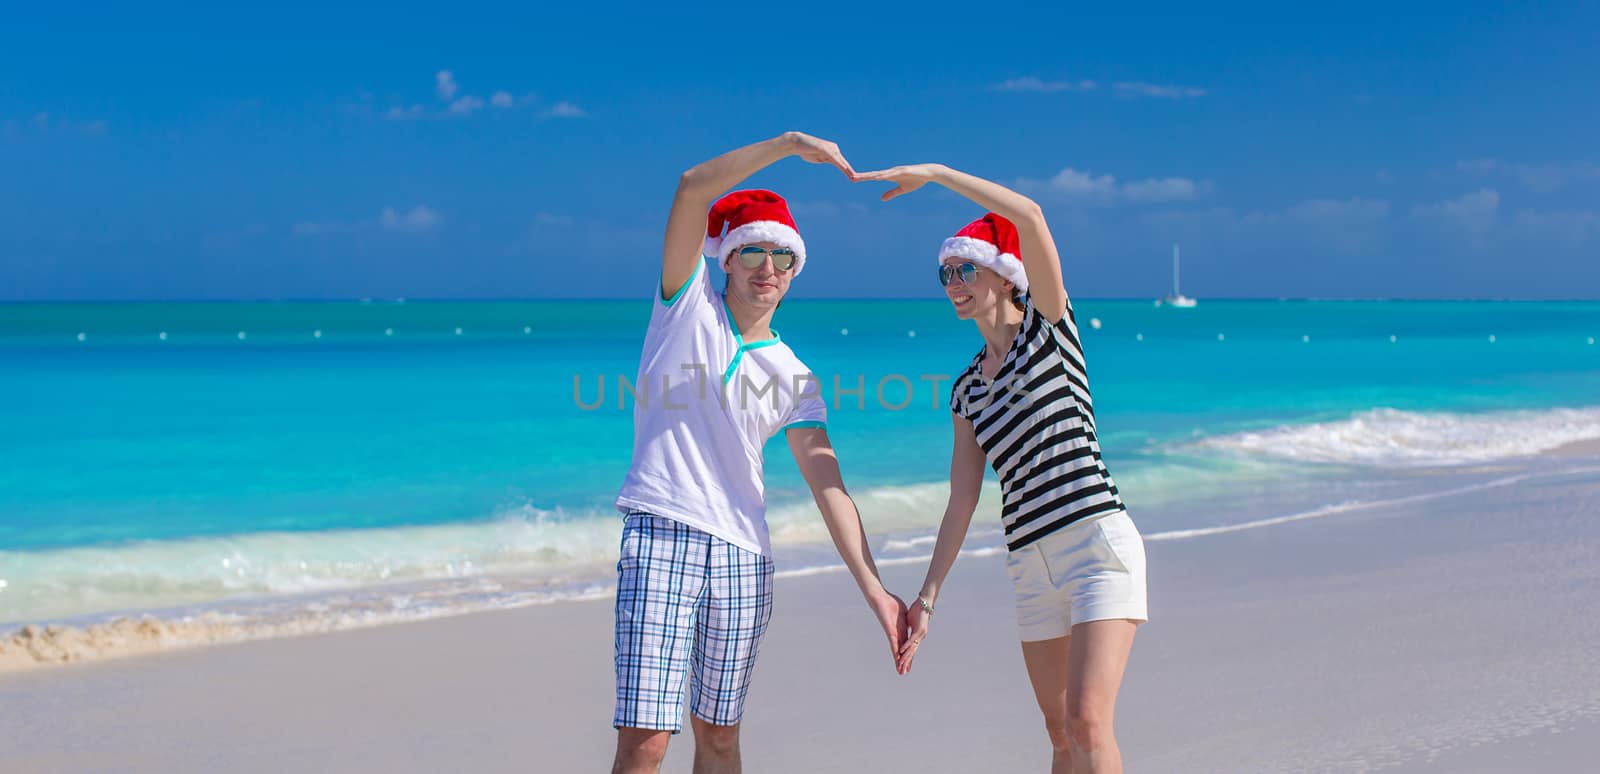 Portrait of young couple in Santa hats enjoy beach vacation by travnikovstudio